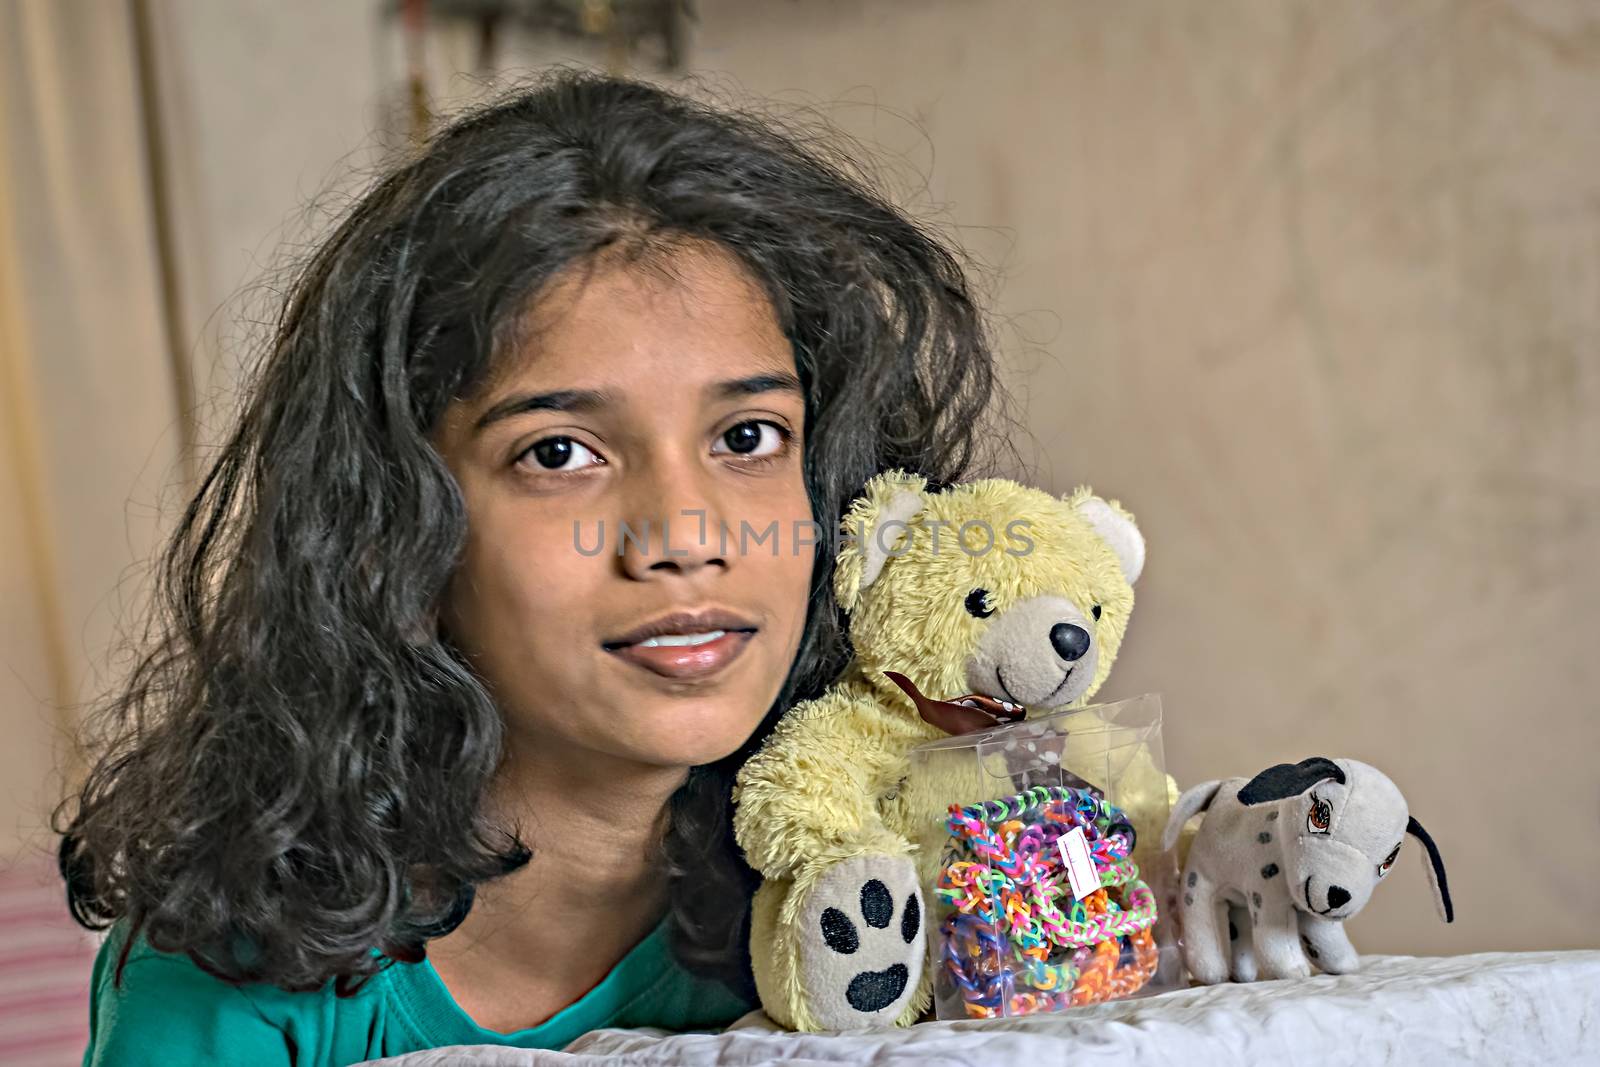 Young girl with her favorite soft toys - teddy bear and puppy.